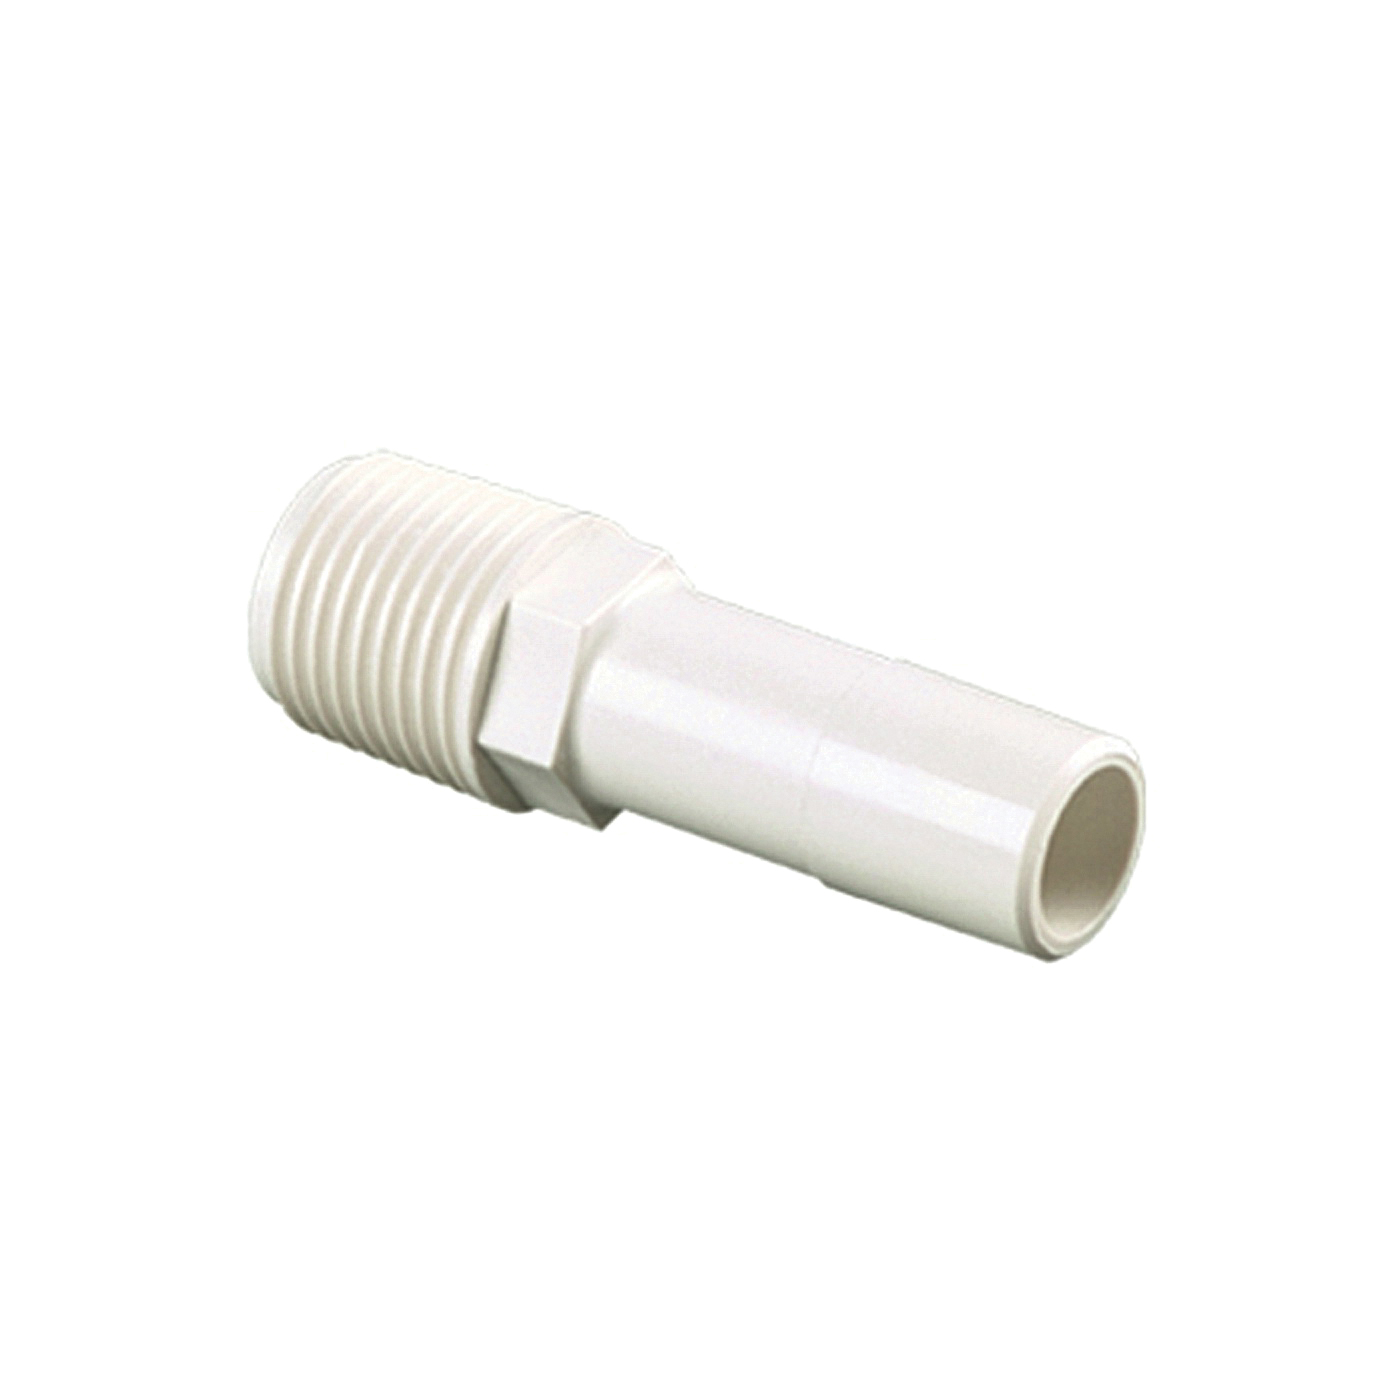 35 Series 3527-1008 Stem Connector, 1/2 in, CTS x MPT, Polypropylene, 250 psi Pressure, Off-White